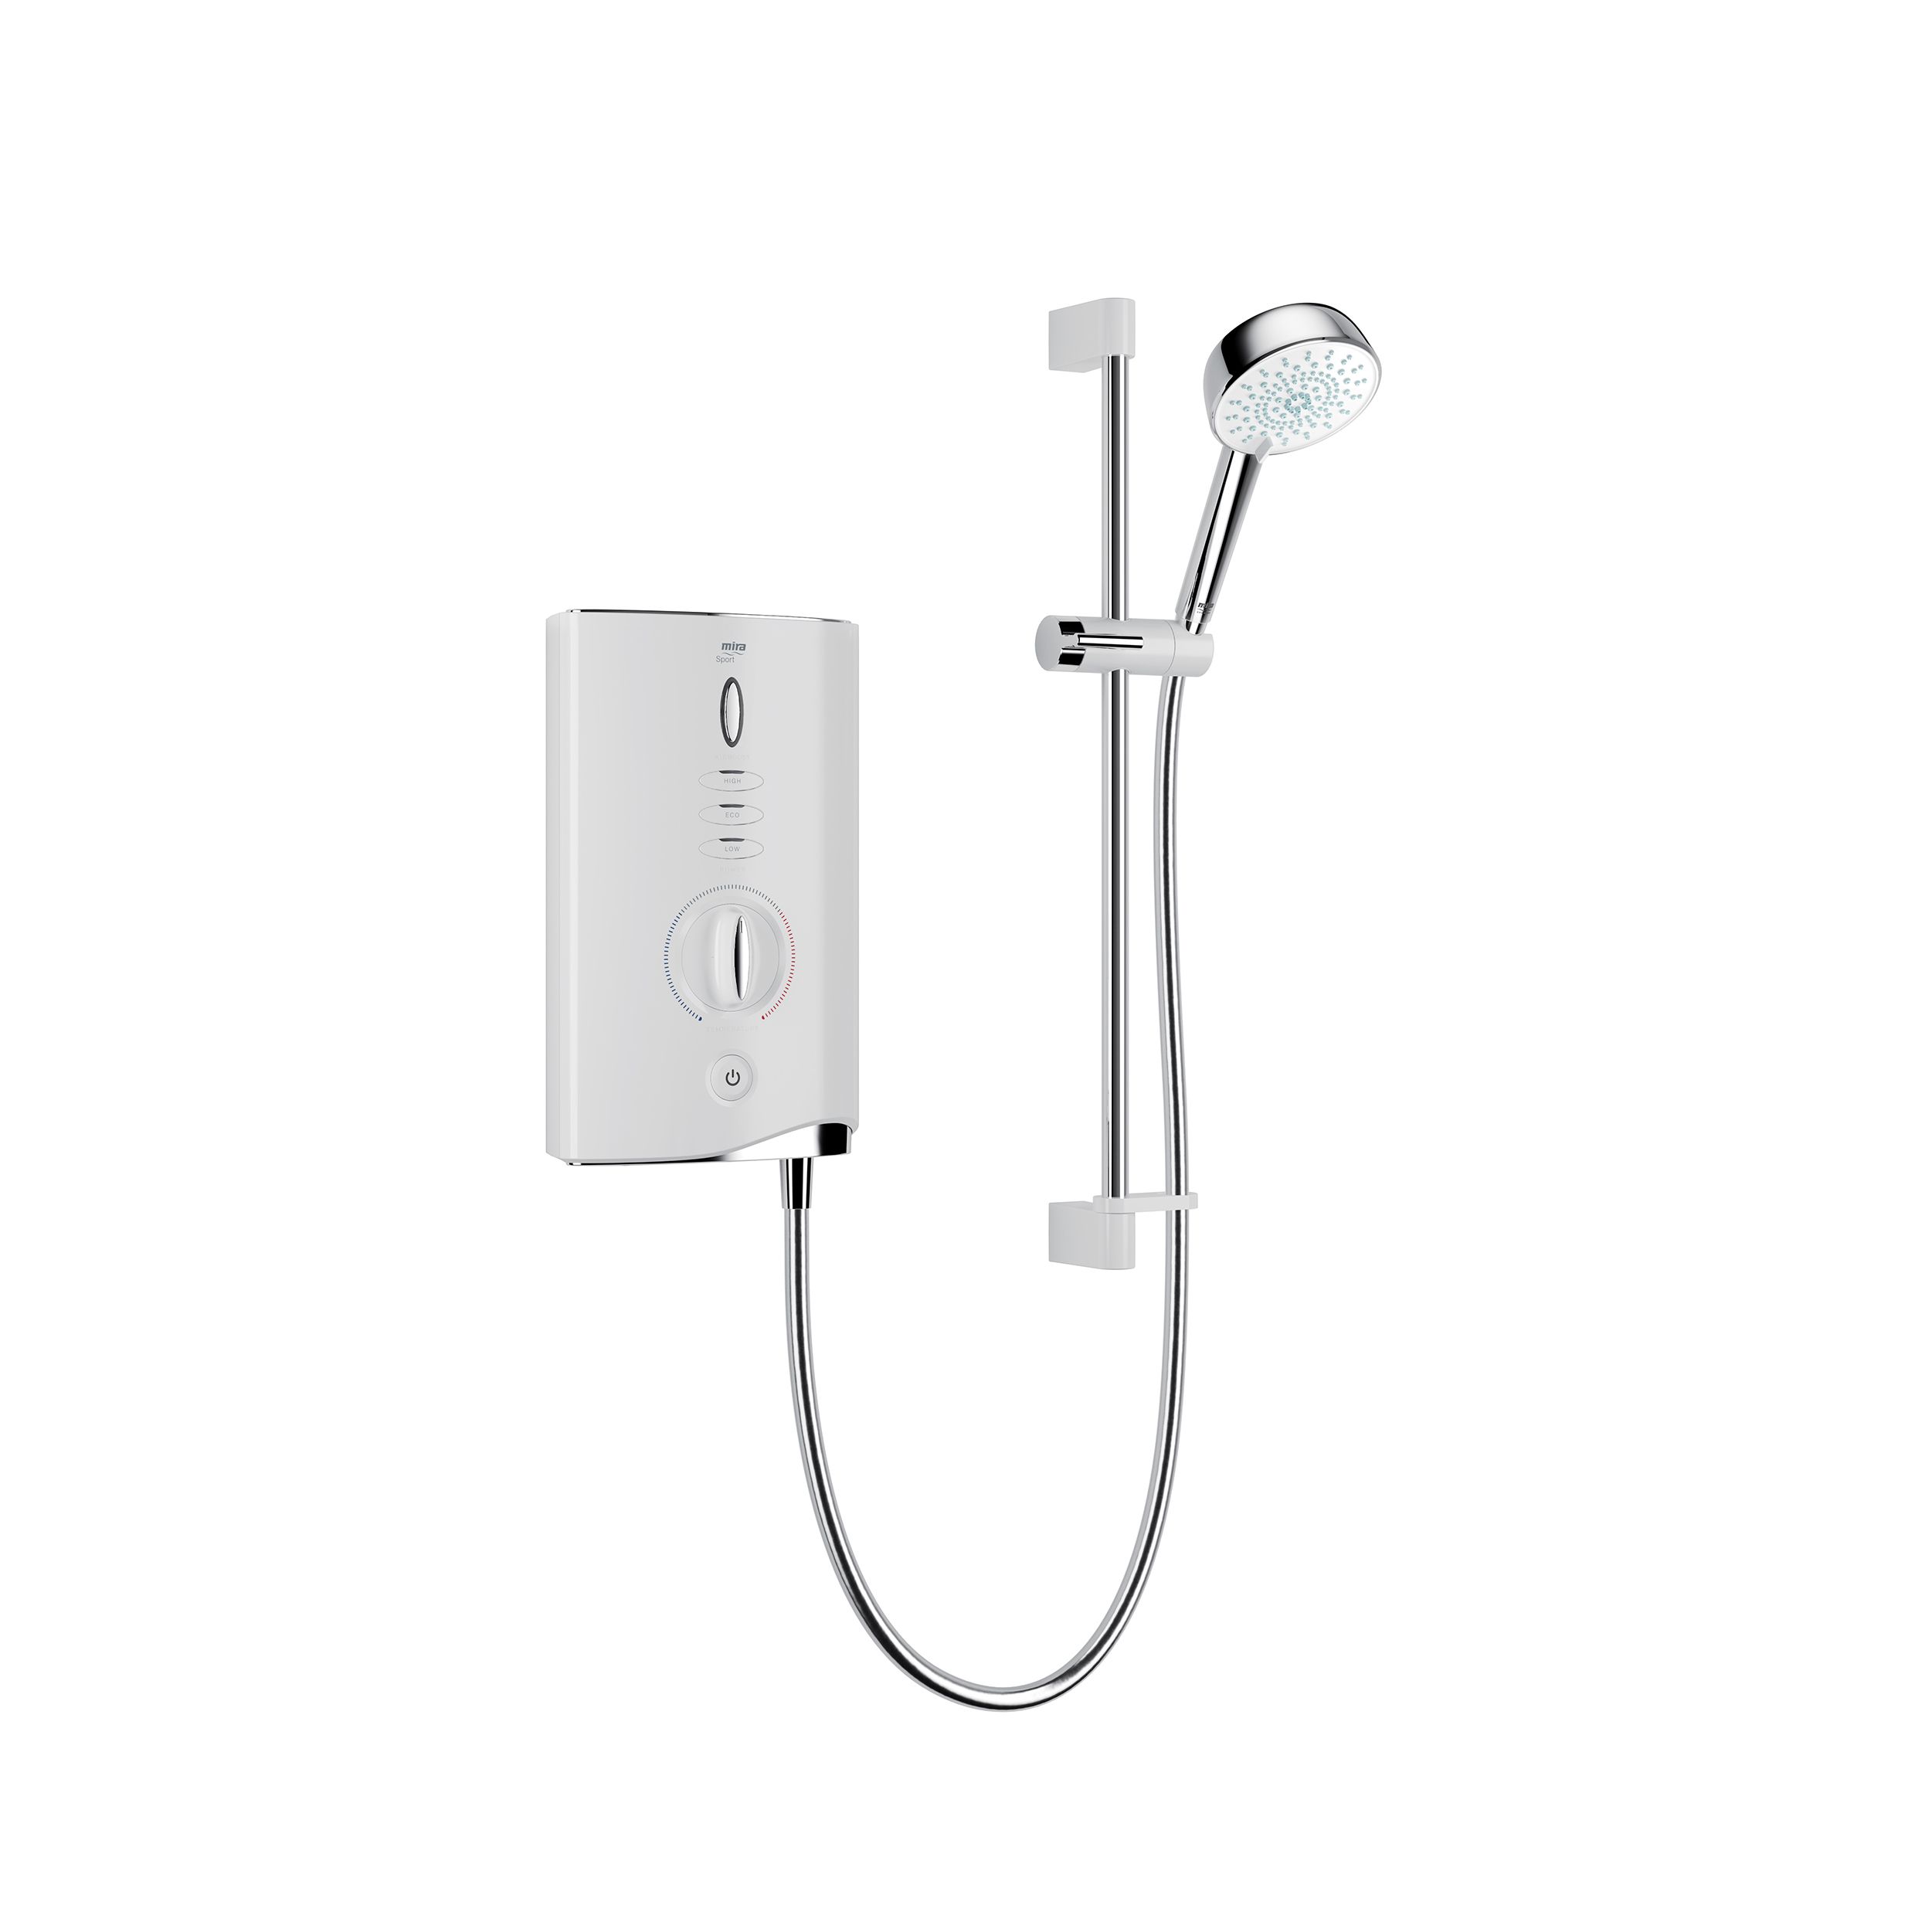 Mira Sport max single outlet Gloss White Electric Shower, 9kW